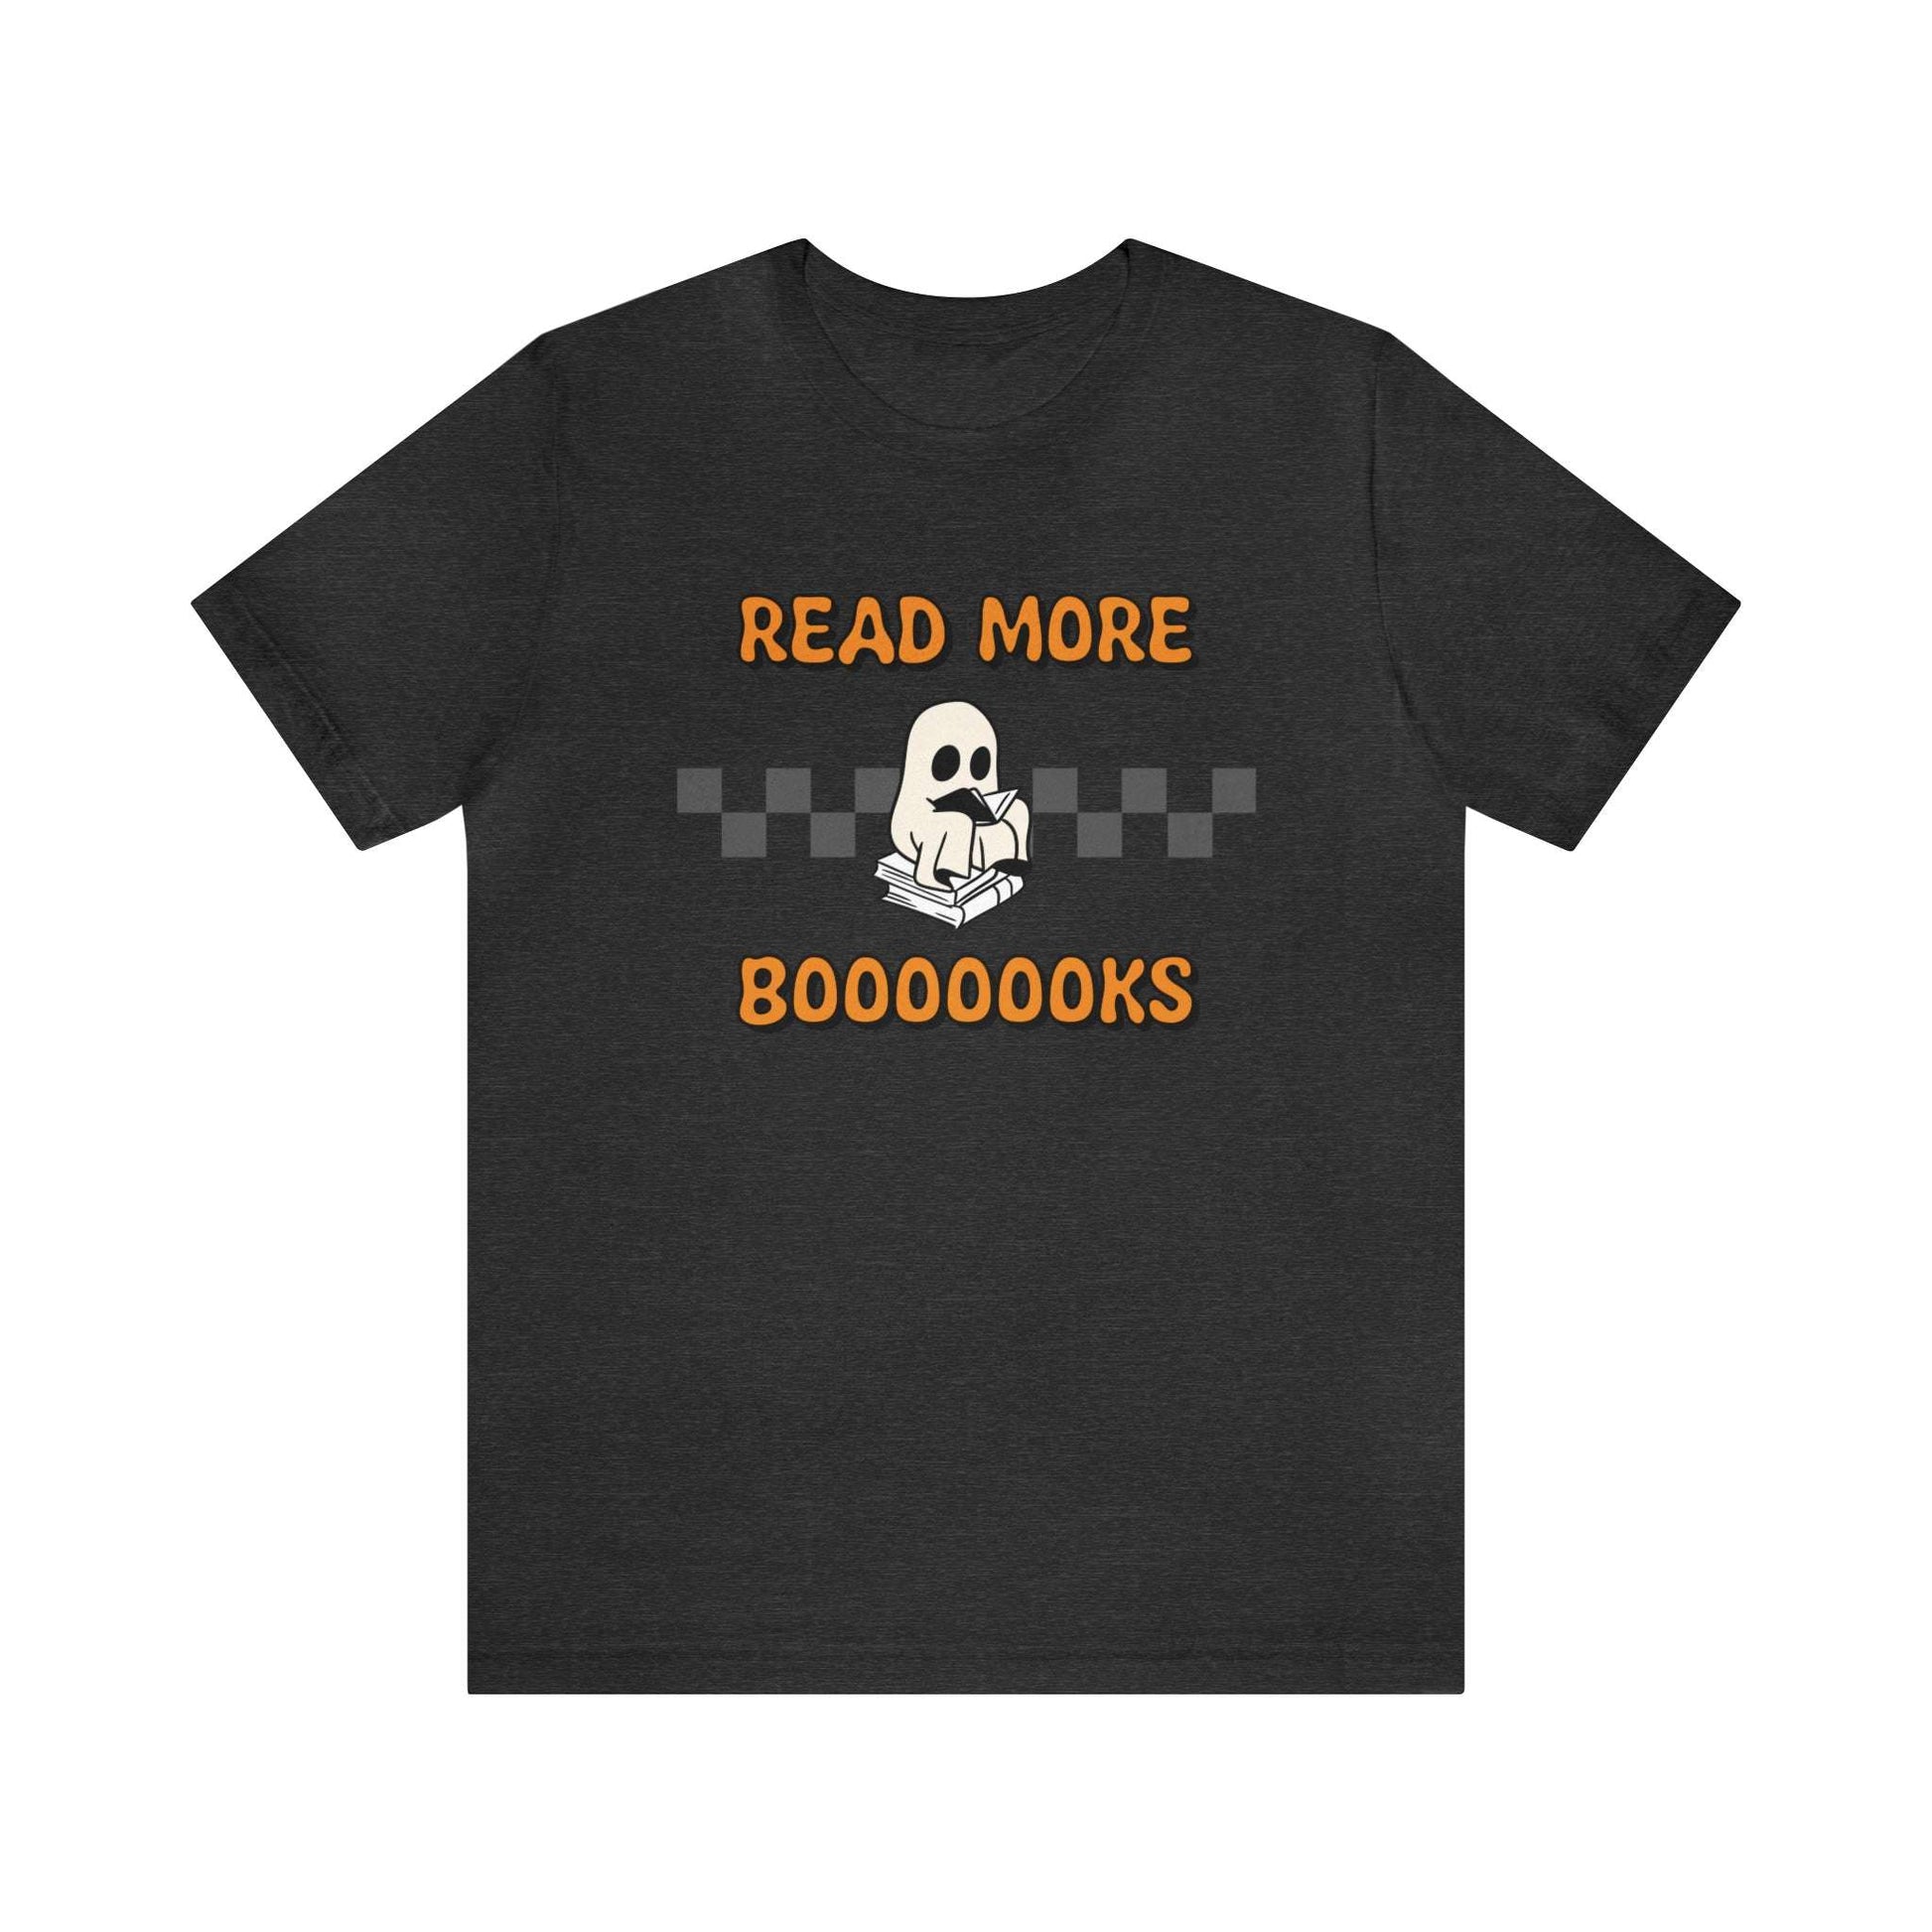 Booooks Womens Short Sleeve Tee ShirtWolfe Paw DesignsBooooks Womens Short Sleeve Tee ShirtA fun Halloween shirt for any book lover!
Also available in kids.
100% Airlume combed and ringspun cotton (fiber content may vary for different colors)Light fabricRuRead More Booooks Womens Short Sleeve Tee Shirt